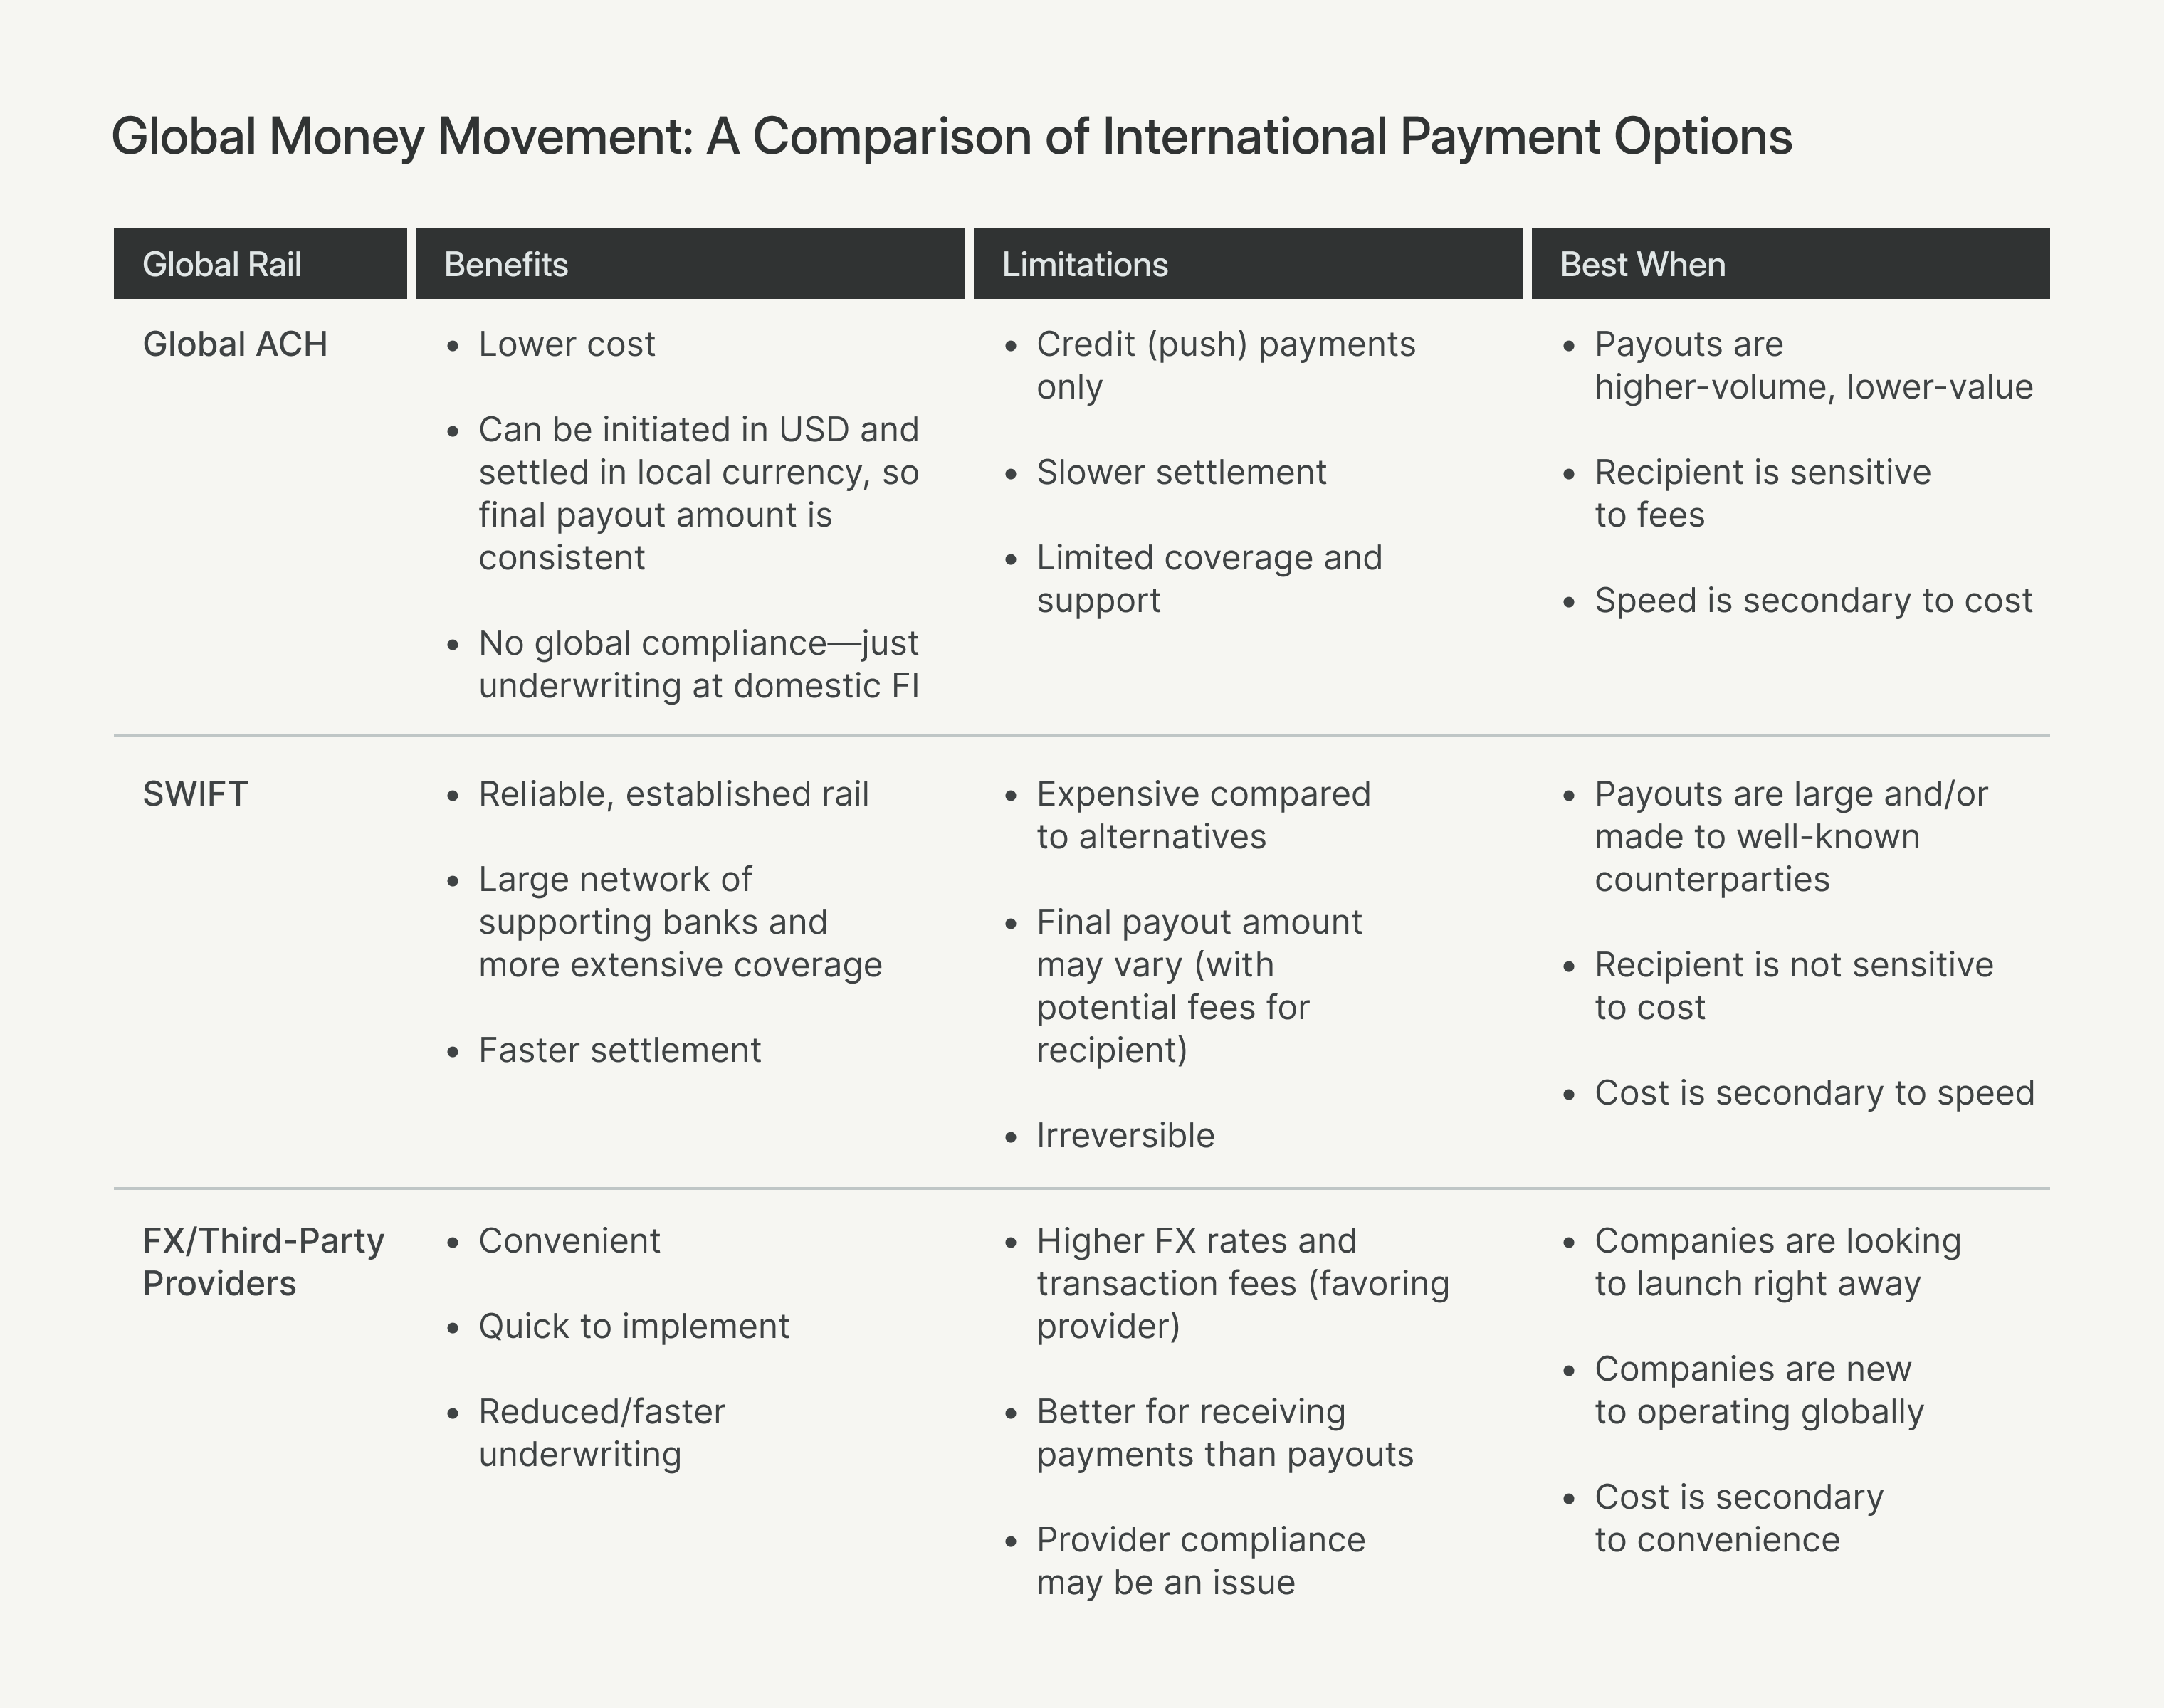 Chart showing the benefits, limitations, and best uses for international payment options including Global ACH